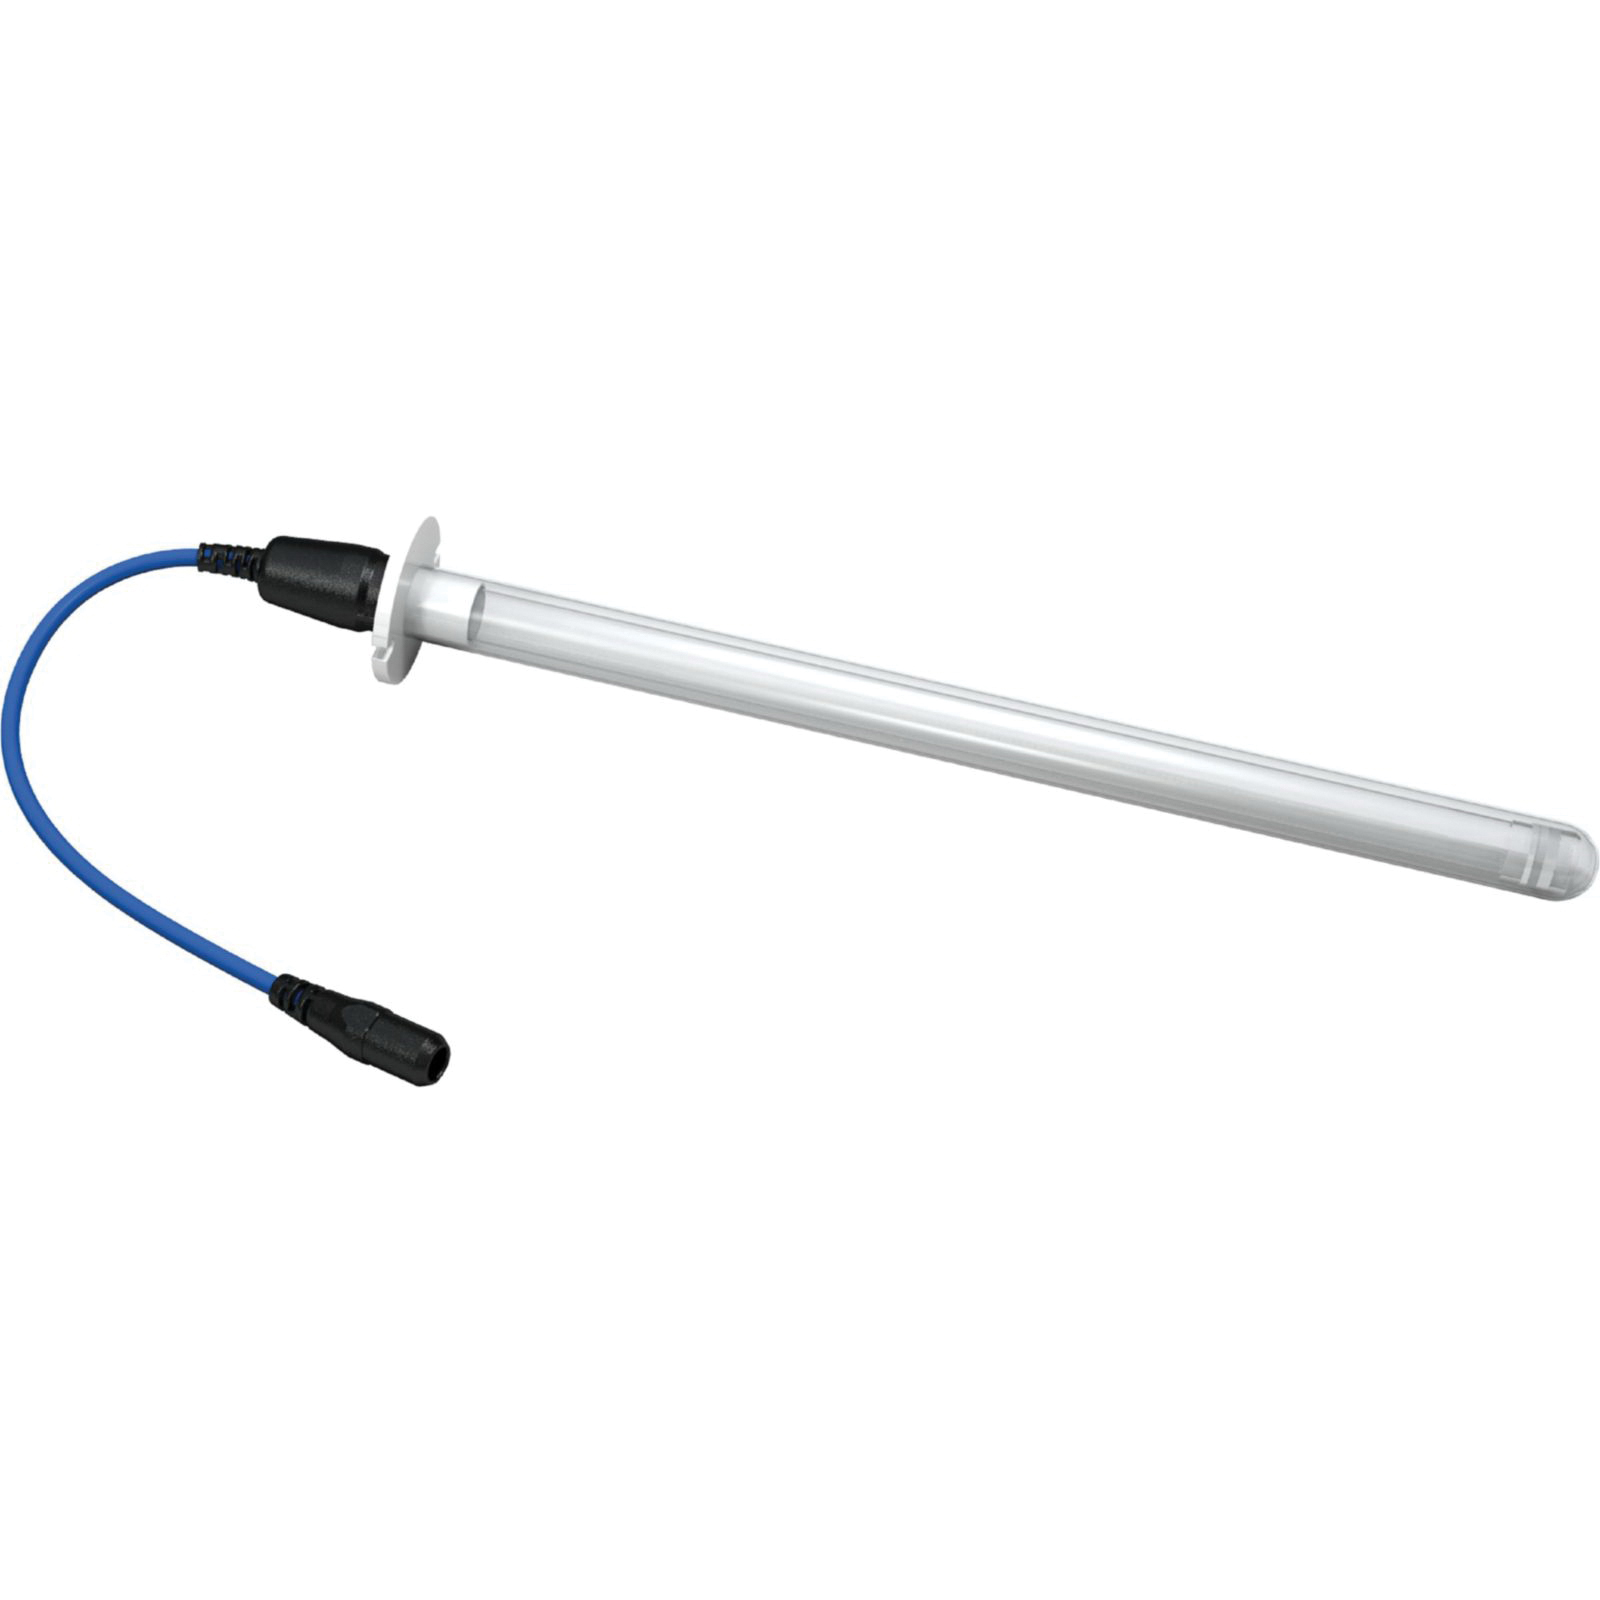 FRESH-AIRE UV® TUVL-215P UV-C Lamp with Pigtail Cable, 425 mA, 5.7, 17 W